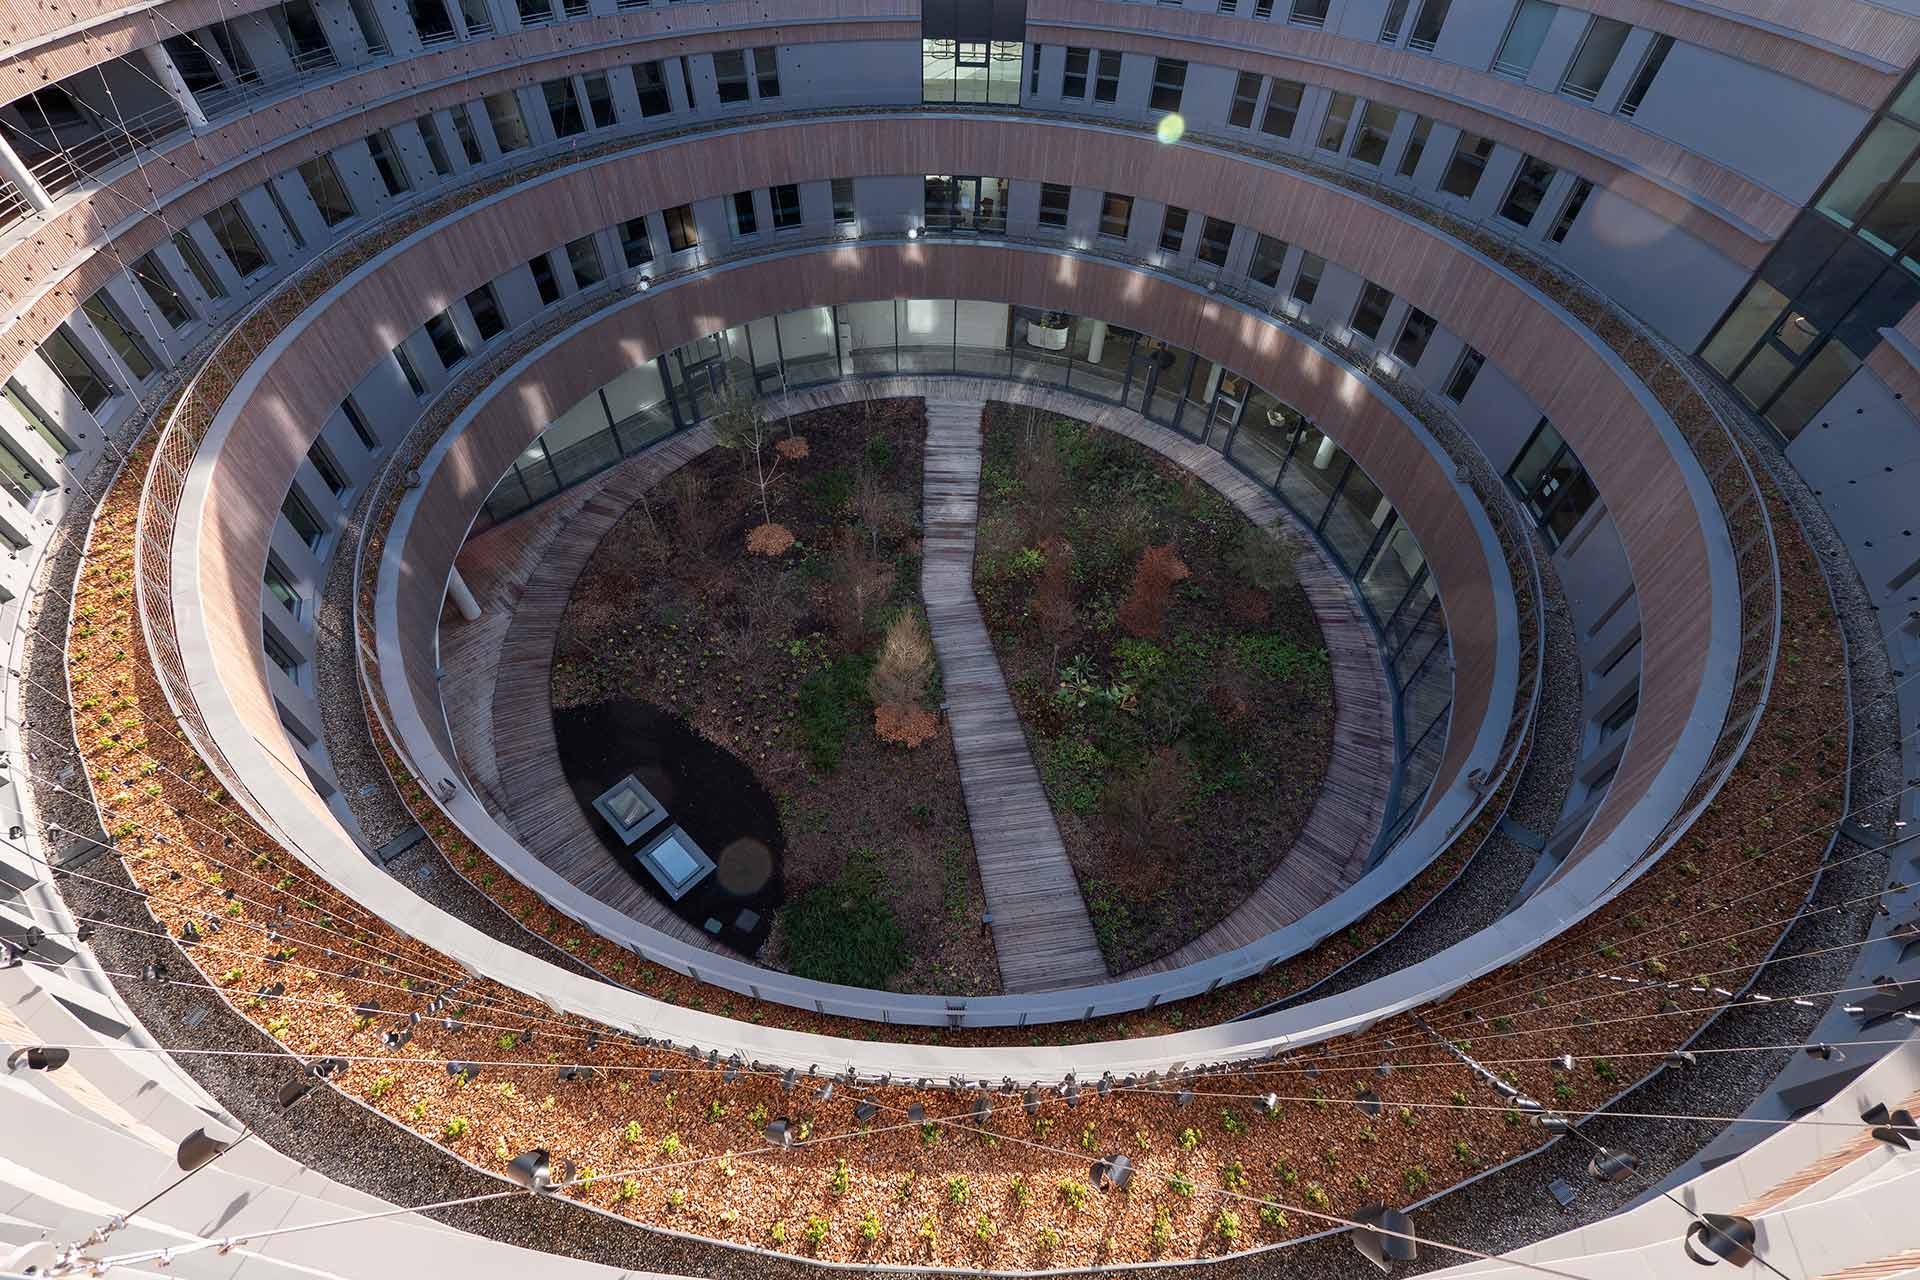 Aerial view of the interior courtyard of the Nouveau Centre, building of the headquarters of the International Agency for Research on Cancer (IARC) installed in the heart of the Lyon-Gerland Biodistrict (Lyon metropolitan area, France)